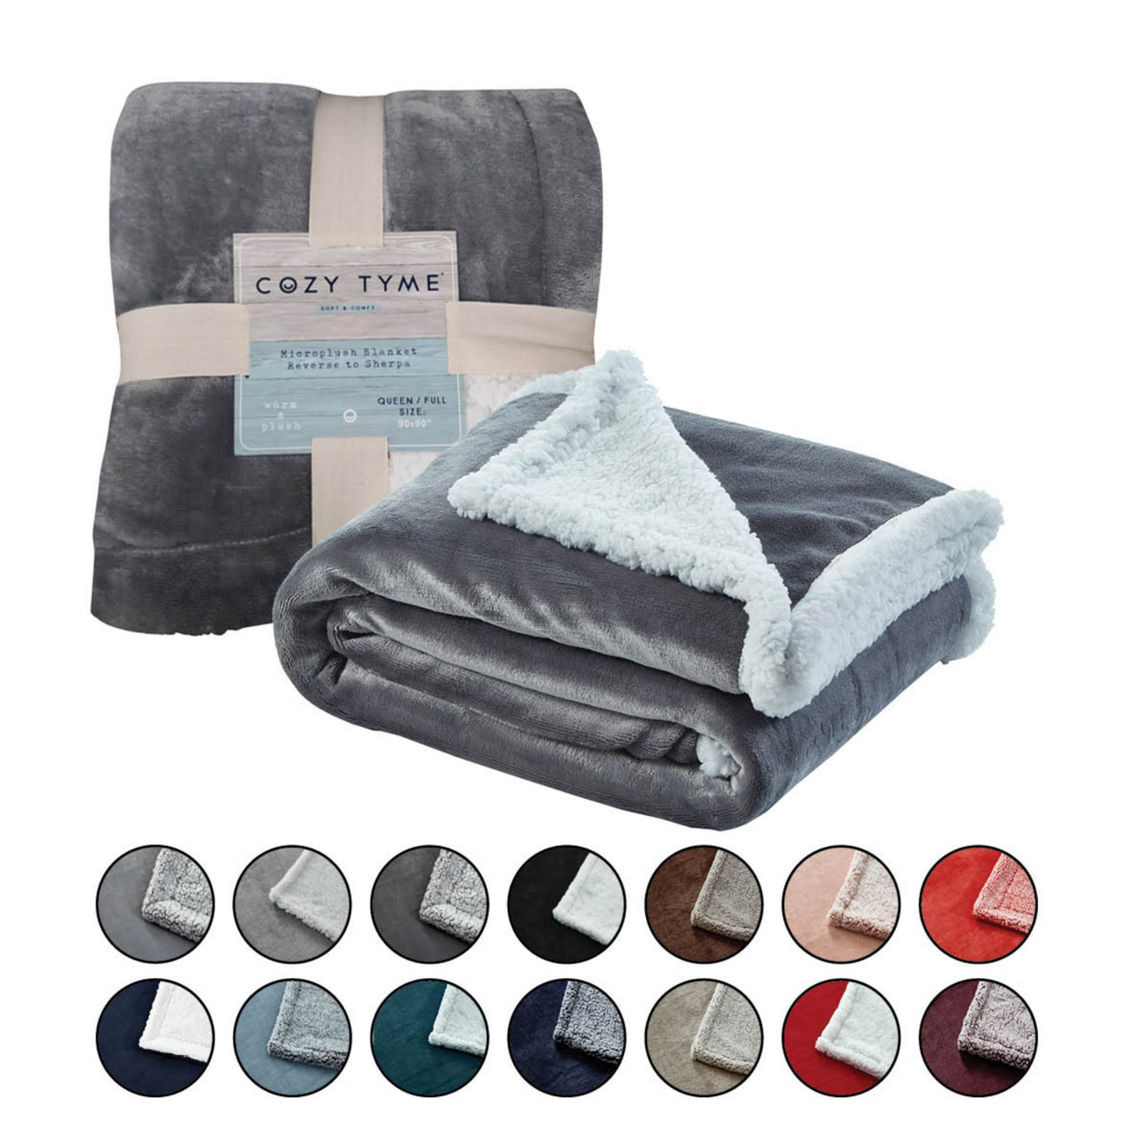 Cozy Tyme Urima Flannel Reversible Heathered Sherpa Throw Blanket - Image 5 of 5